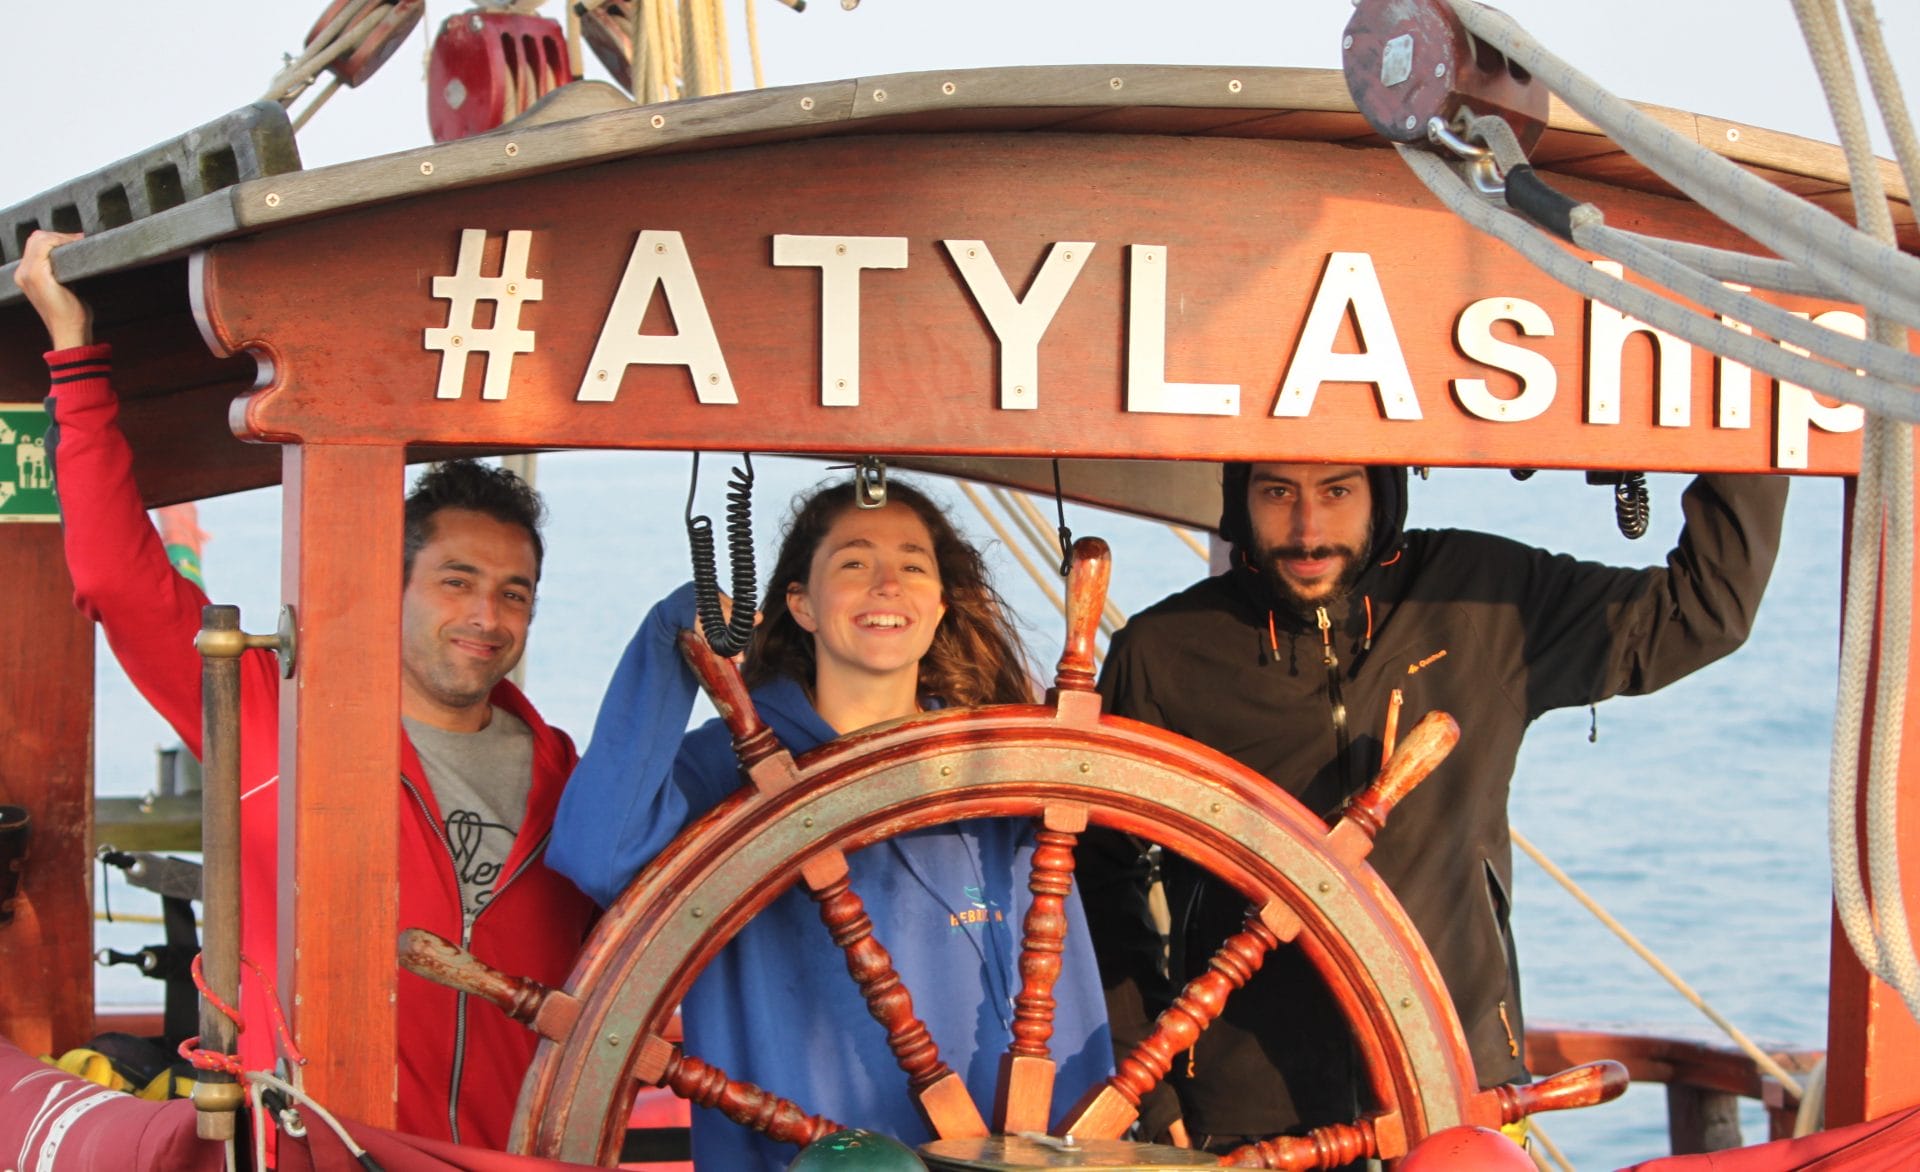 Excursions Sailing Sail Bilbao Spain Atyla Ship Itsasmuseum Fun Activity Covid Safe Family Kids Outdoors